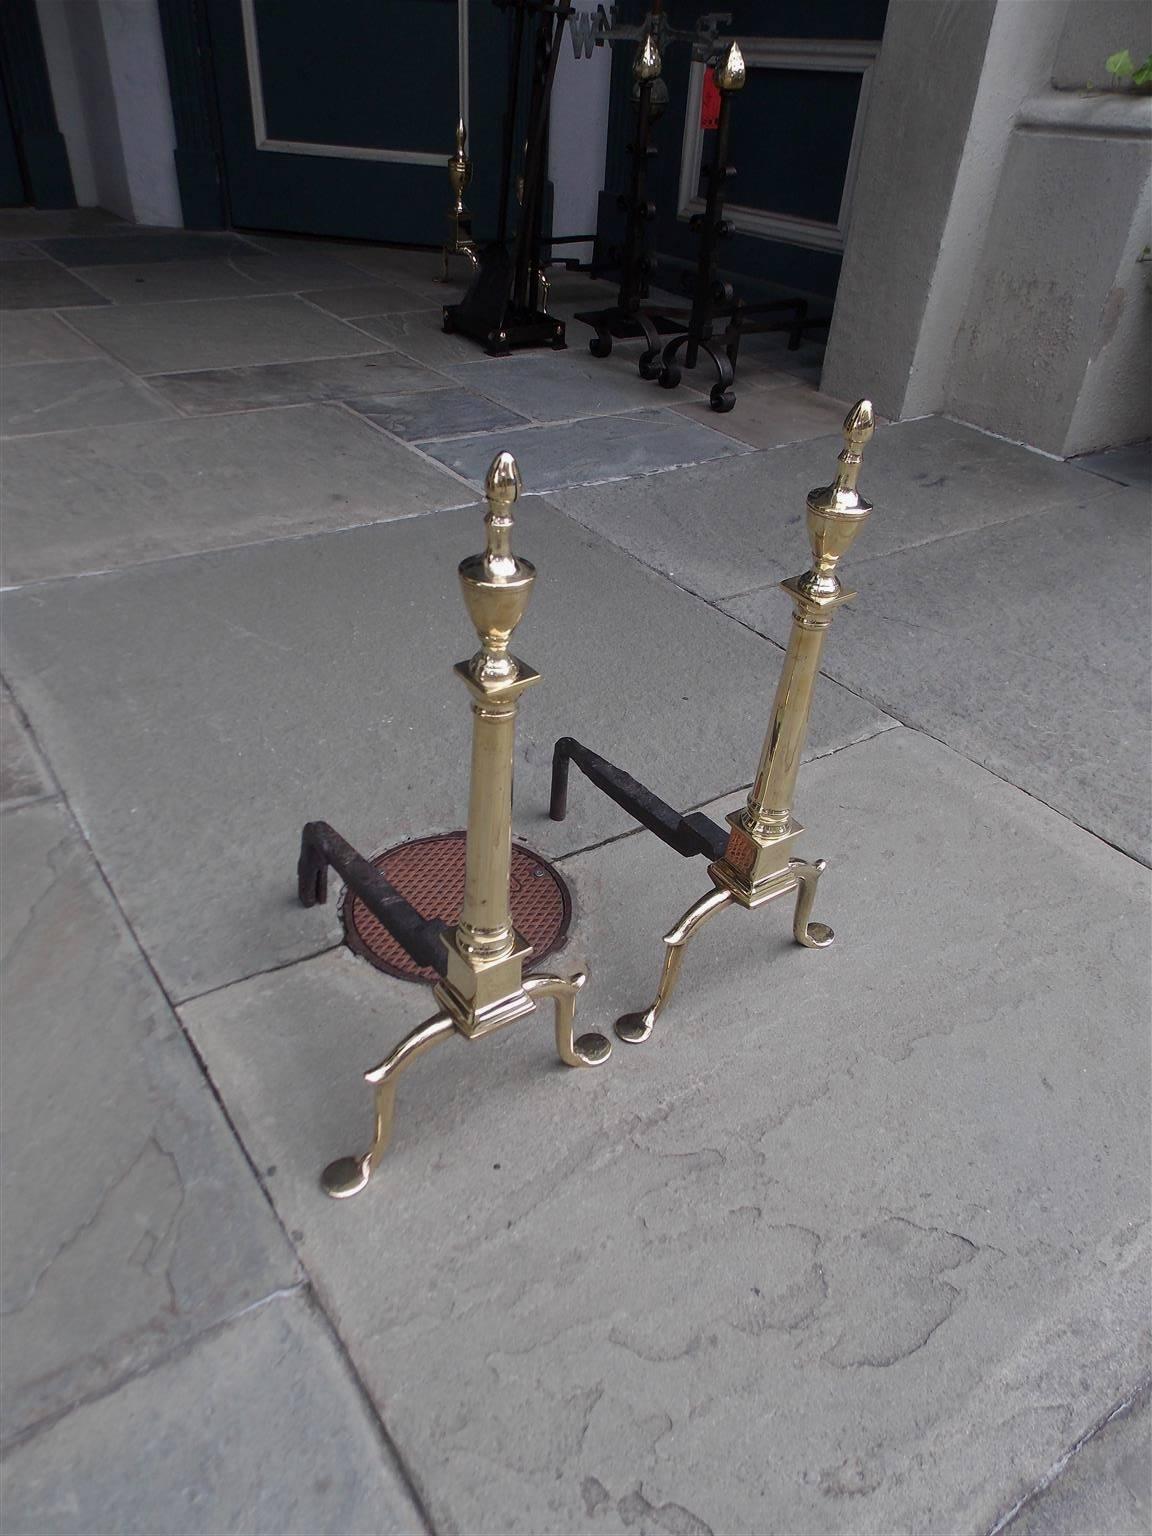 Pair of Graceful American brass and wrought iron andirons with urn finials, circular columns, squared plinths, straight skirts, spur legs, and terminating on step back penny feet, Late 18th century, Philadelphia.